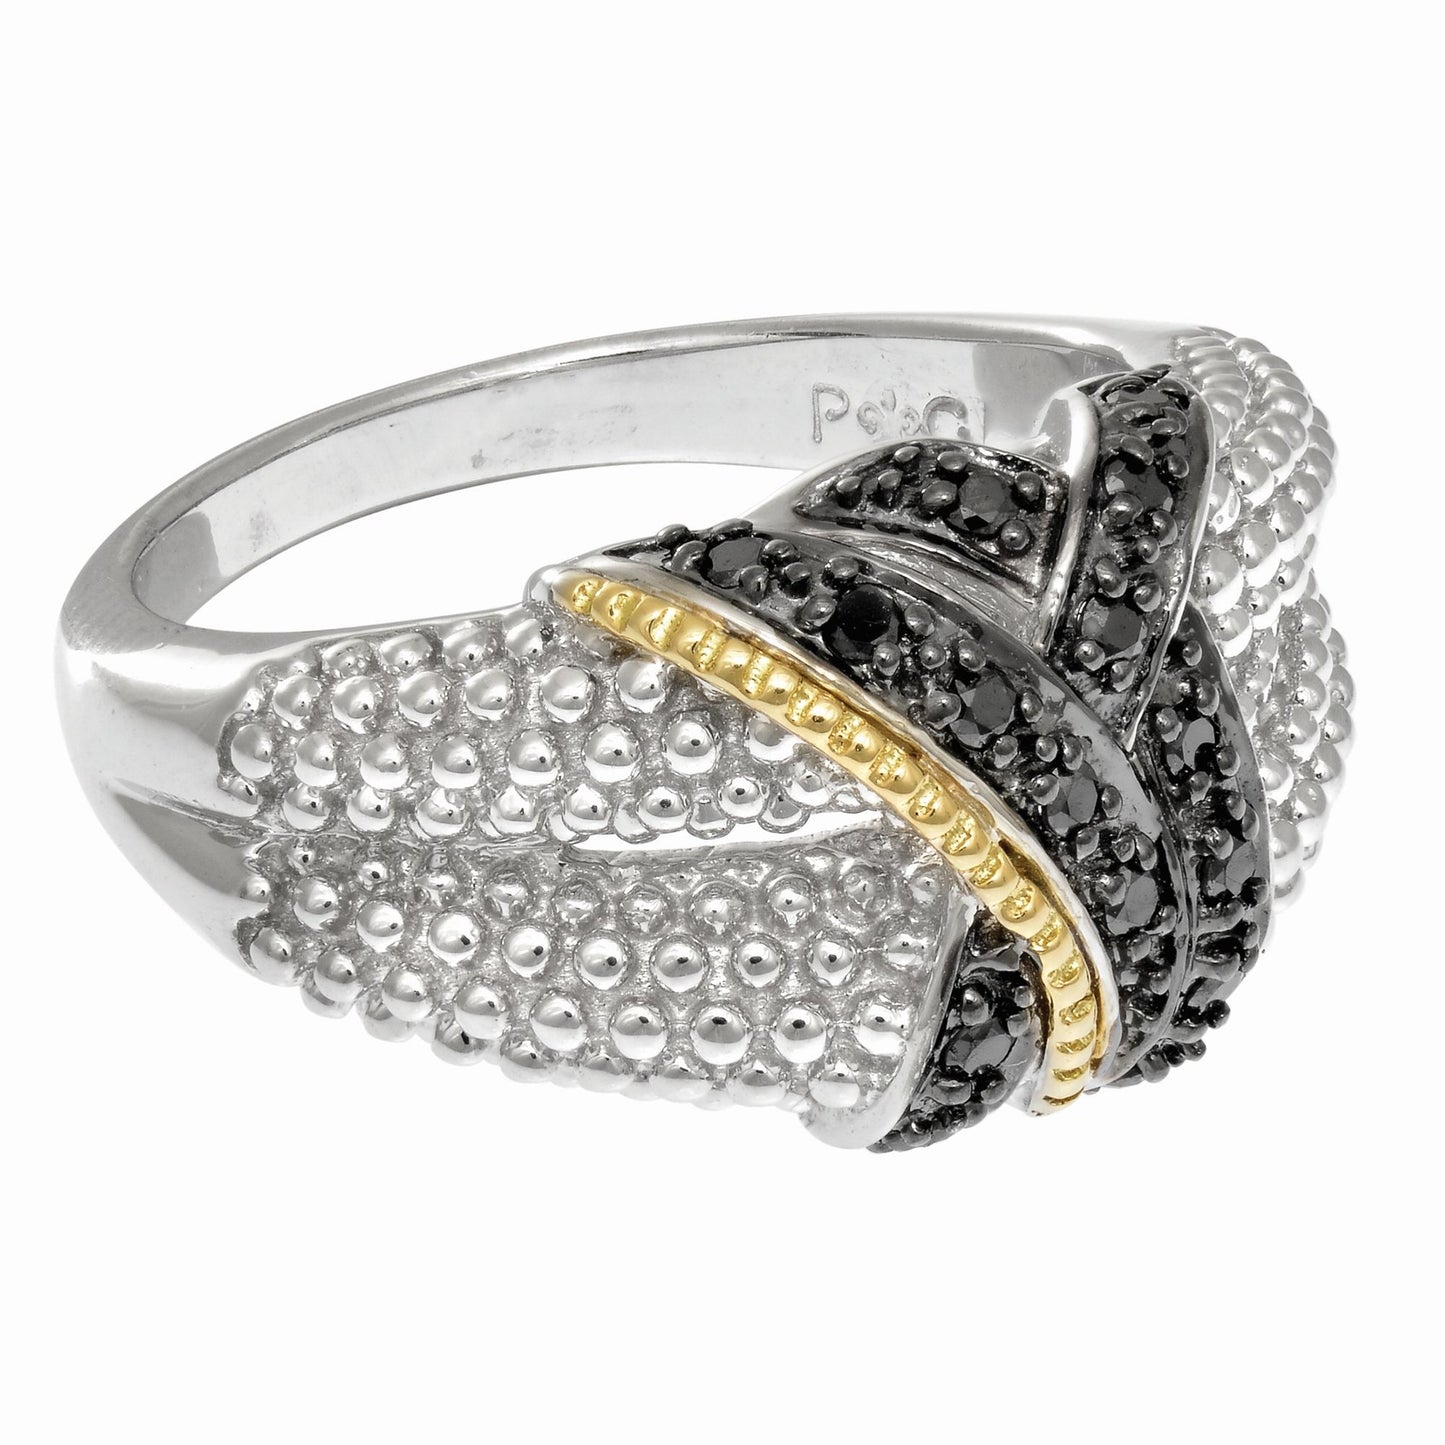 18kt Yellow Gold Silver with Rhodium Black Rhodium Finish Shiny Ring with 15-0 .01ct Faceted Black Diamond